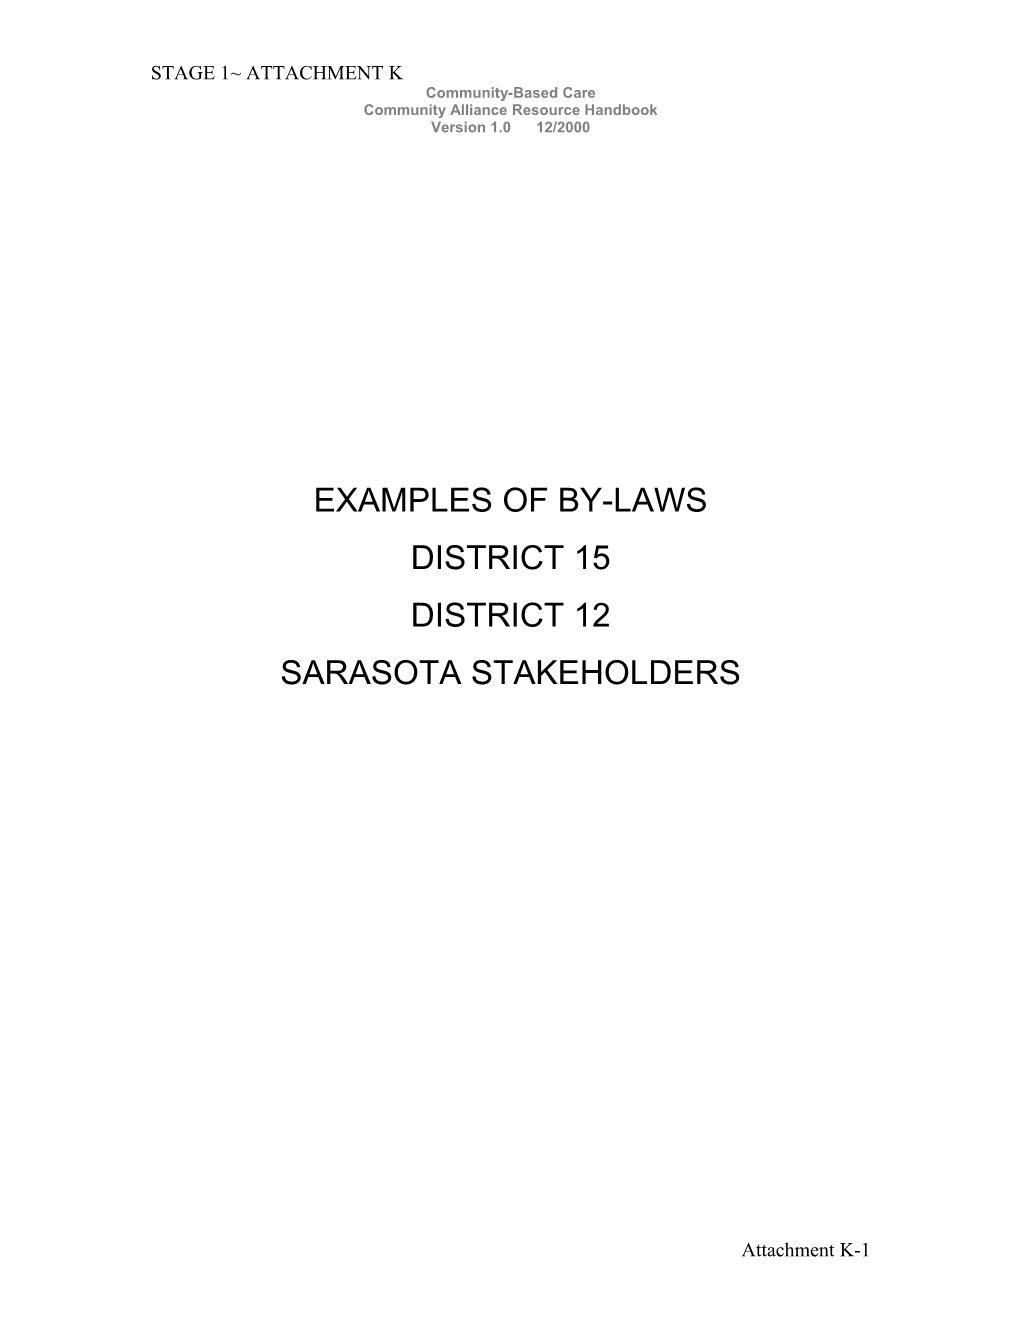 Examples of By-Laws